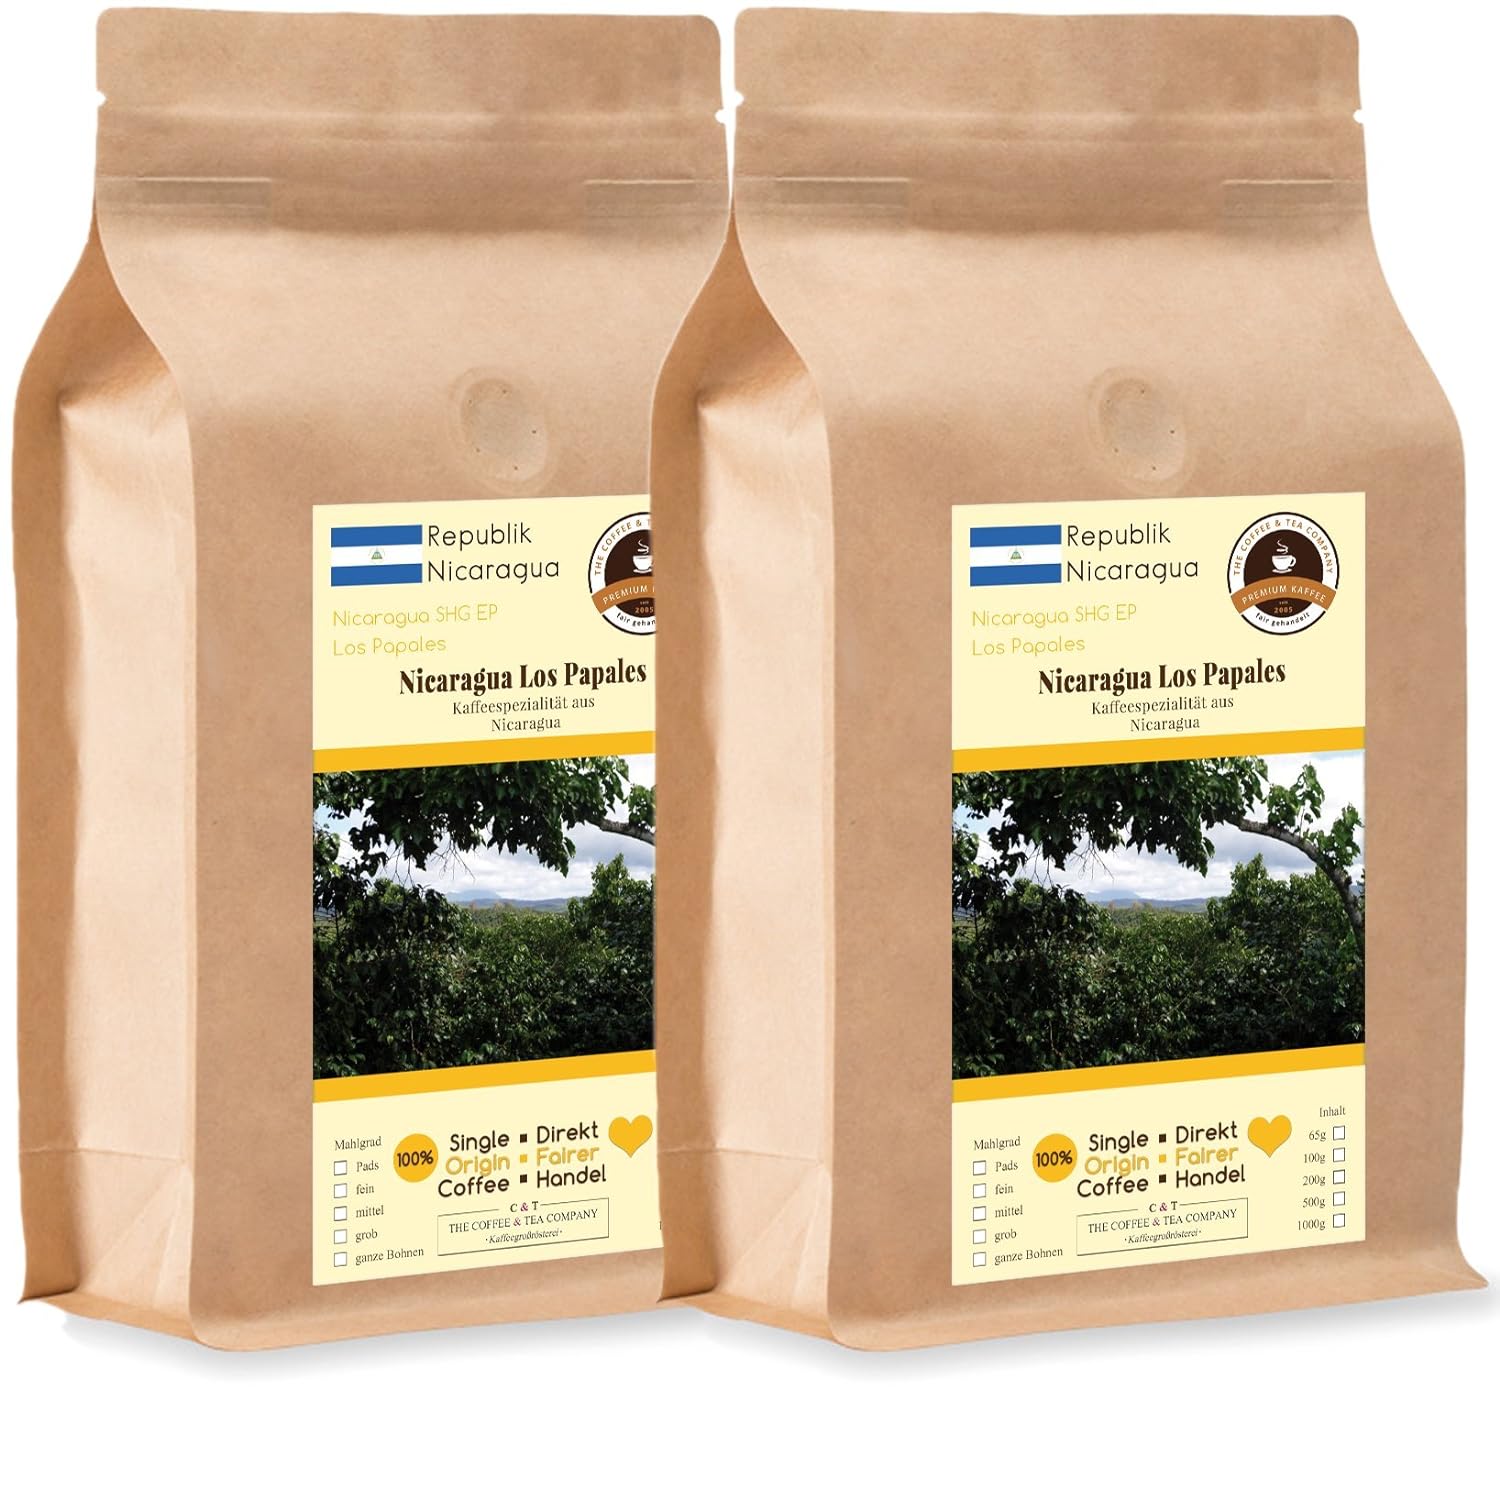 Coffee Globetrotter - Coffee with Heart - Nicaragua Los Papales - 2 x 1000 g Very Fine Ground - for Fully Automatic Coffee Grinder - Roasted Coffee Fair Trade | Refill Pack Economy Pack